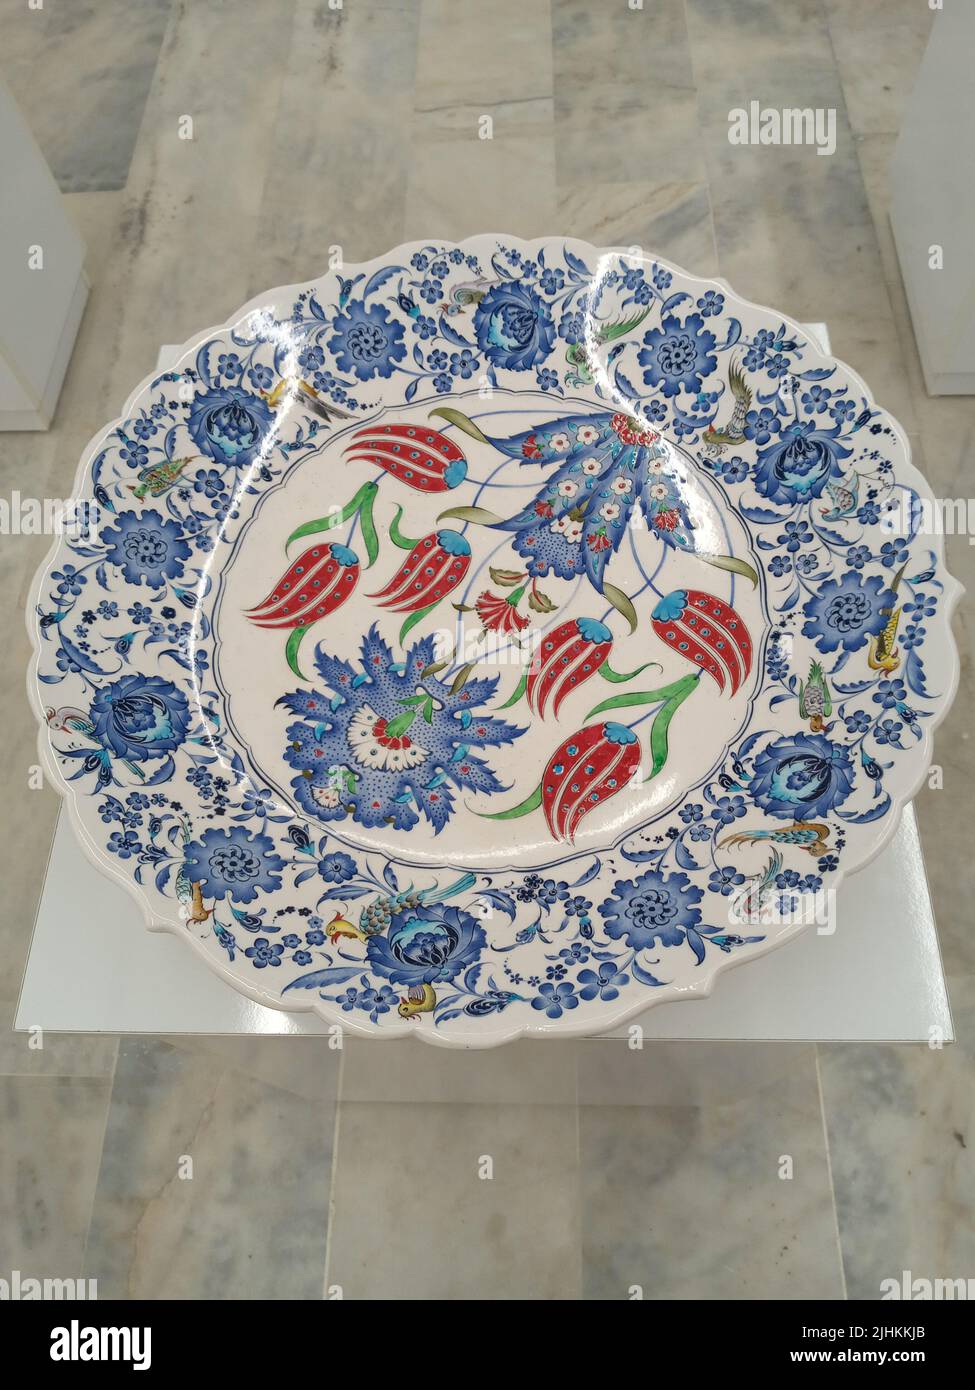 Ankara, Türkiye – June 5, 2022: Ceramics exhibited at the State Painting and Sculpture Museum as part of the Festival. Stock Photo